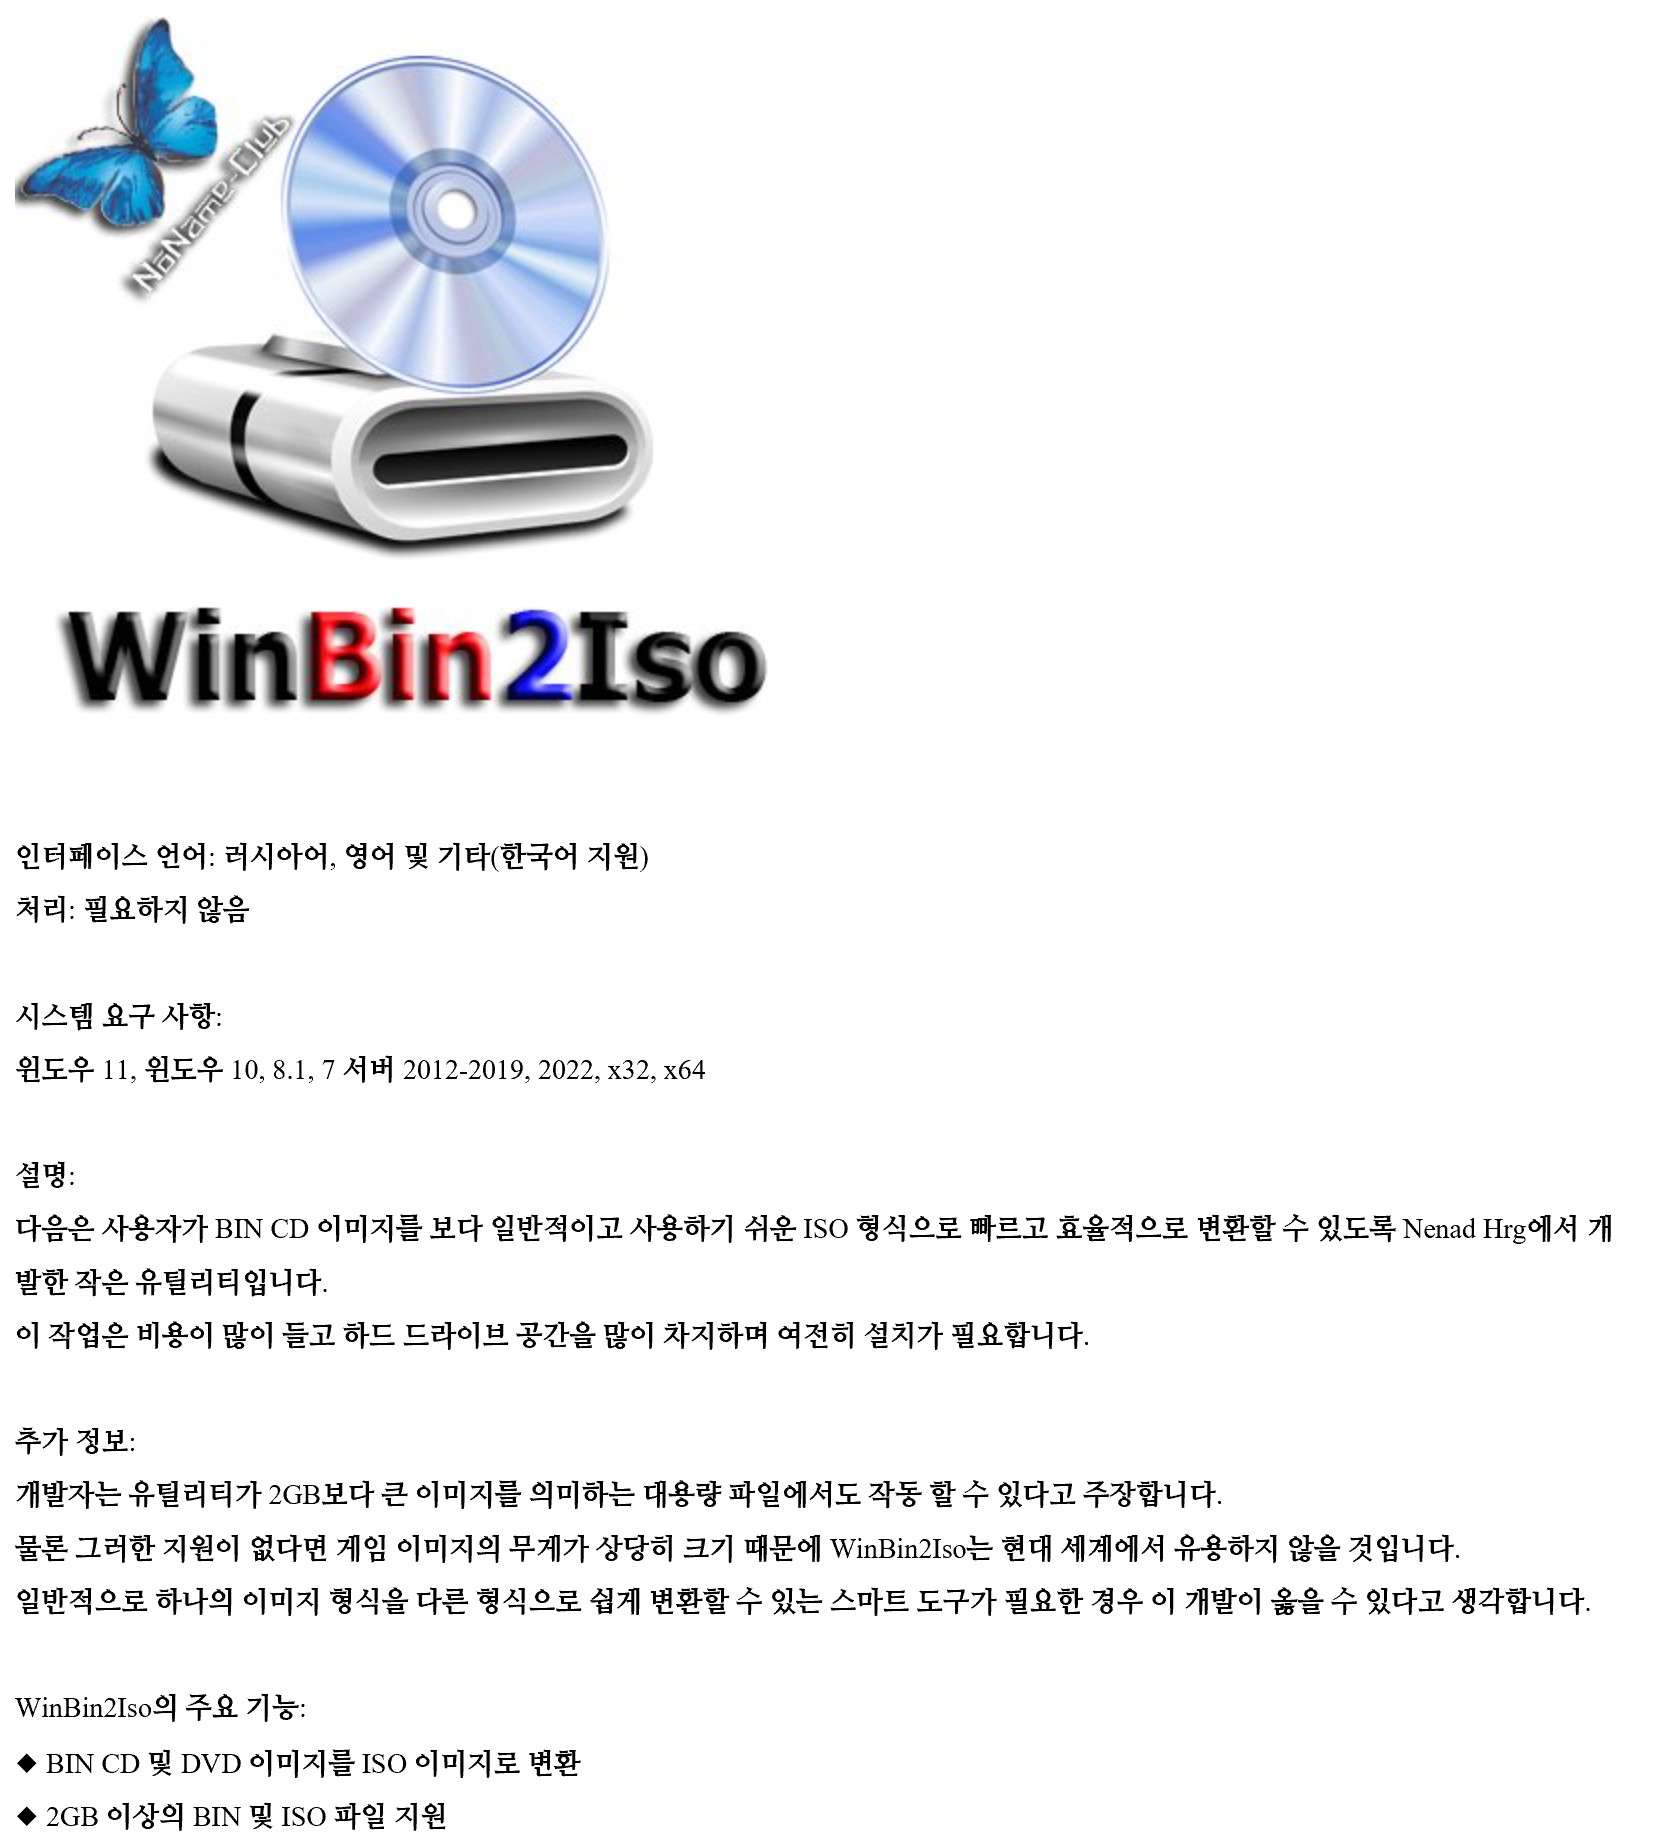 WinBin2Iso 6.21 download the last version for ipod